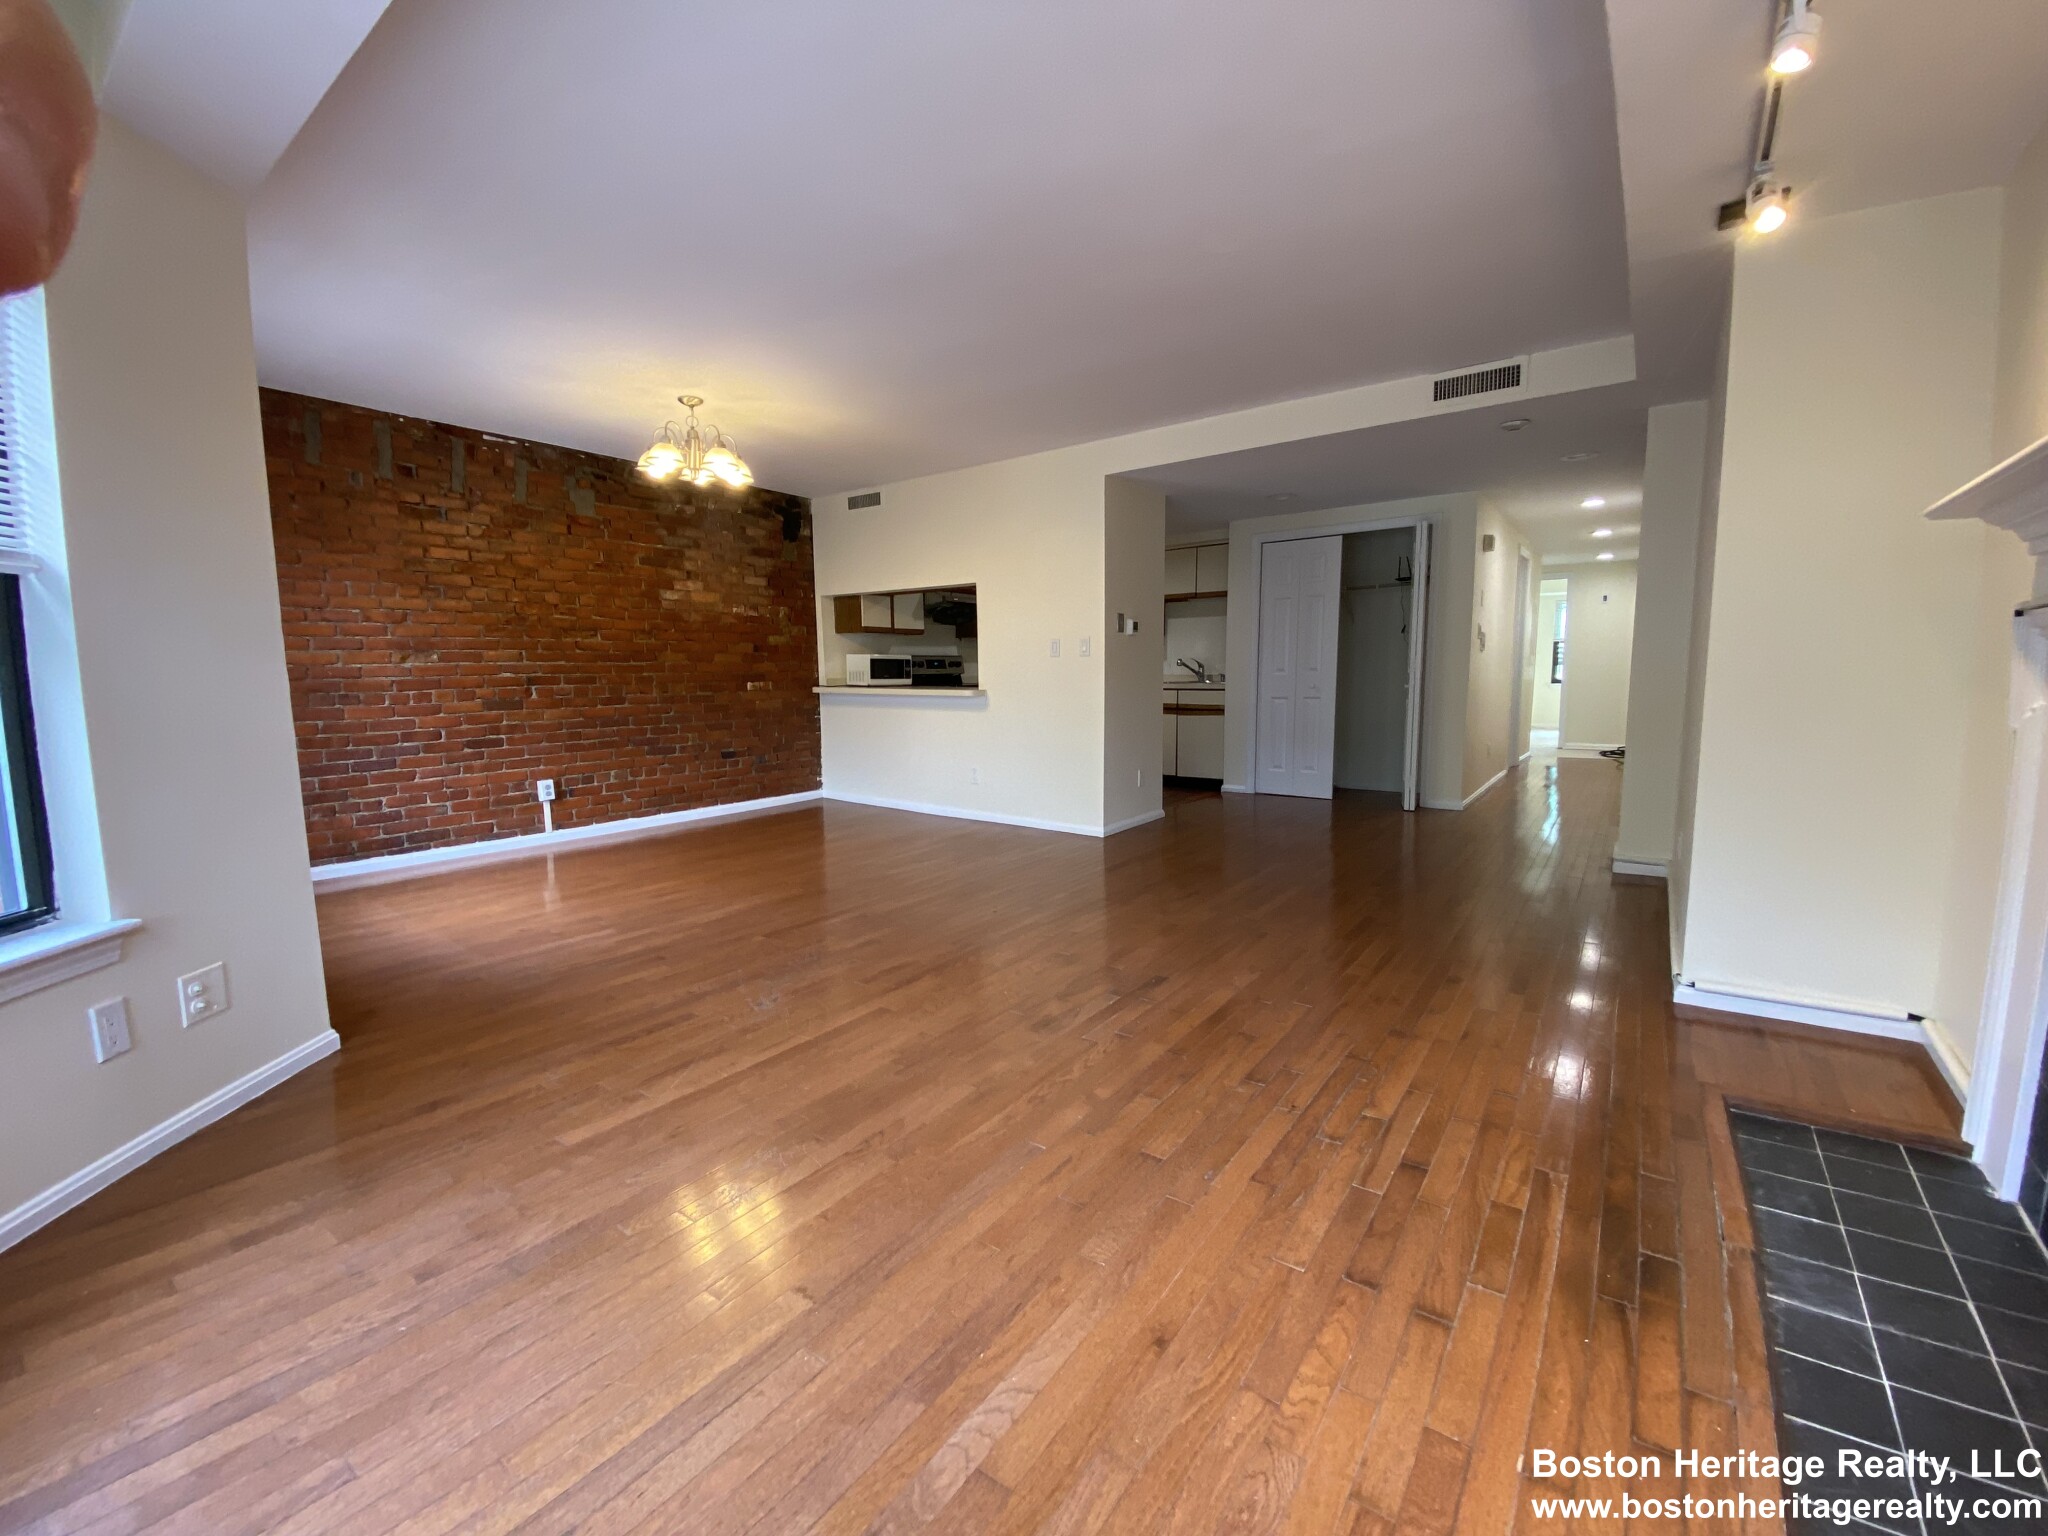 2 Beds, 2 Baths apartment in Boston, Fenway for $3,700